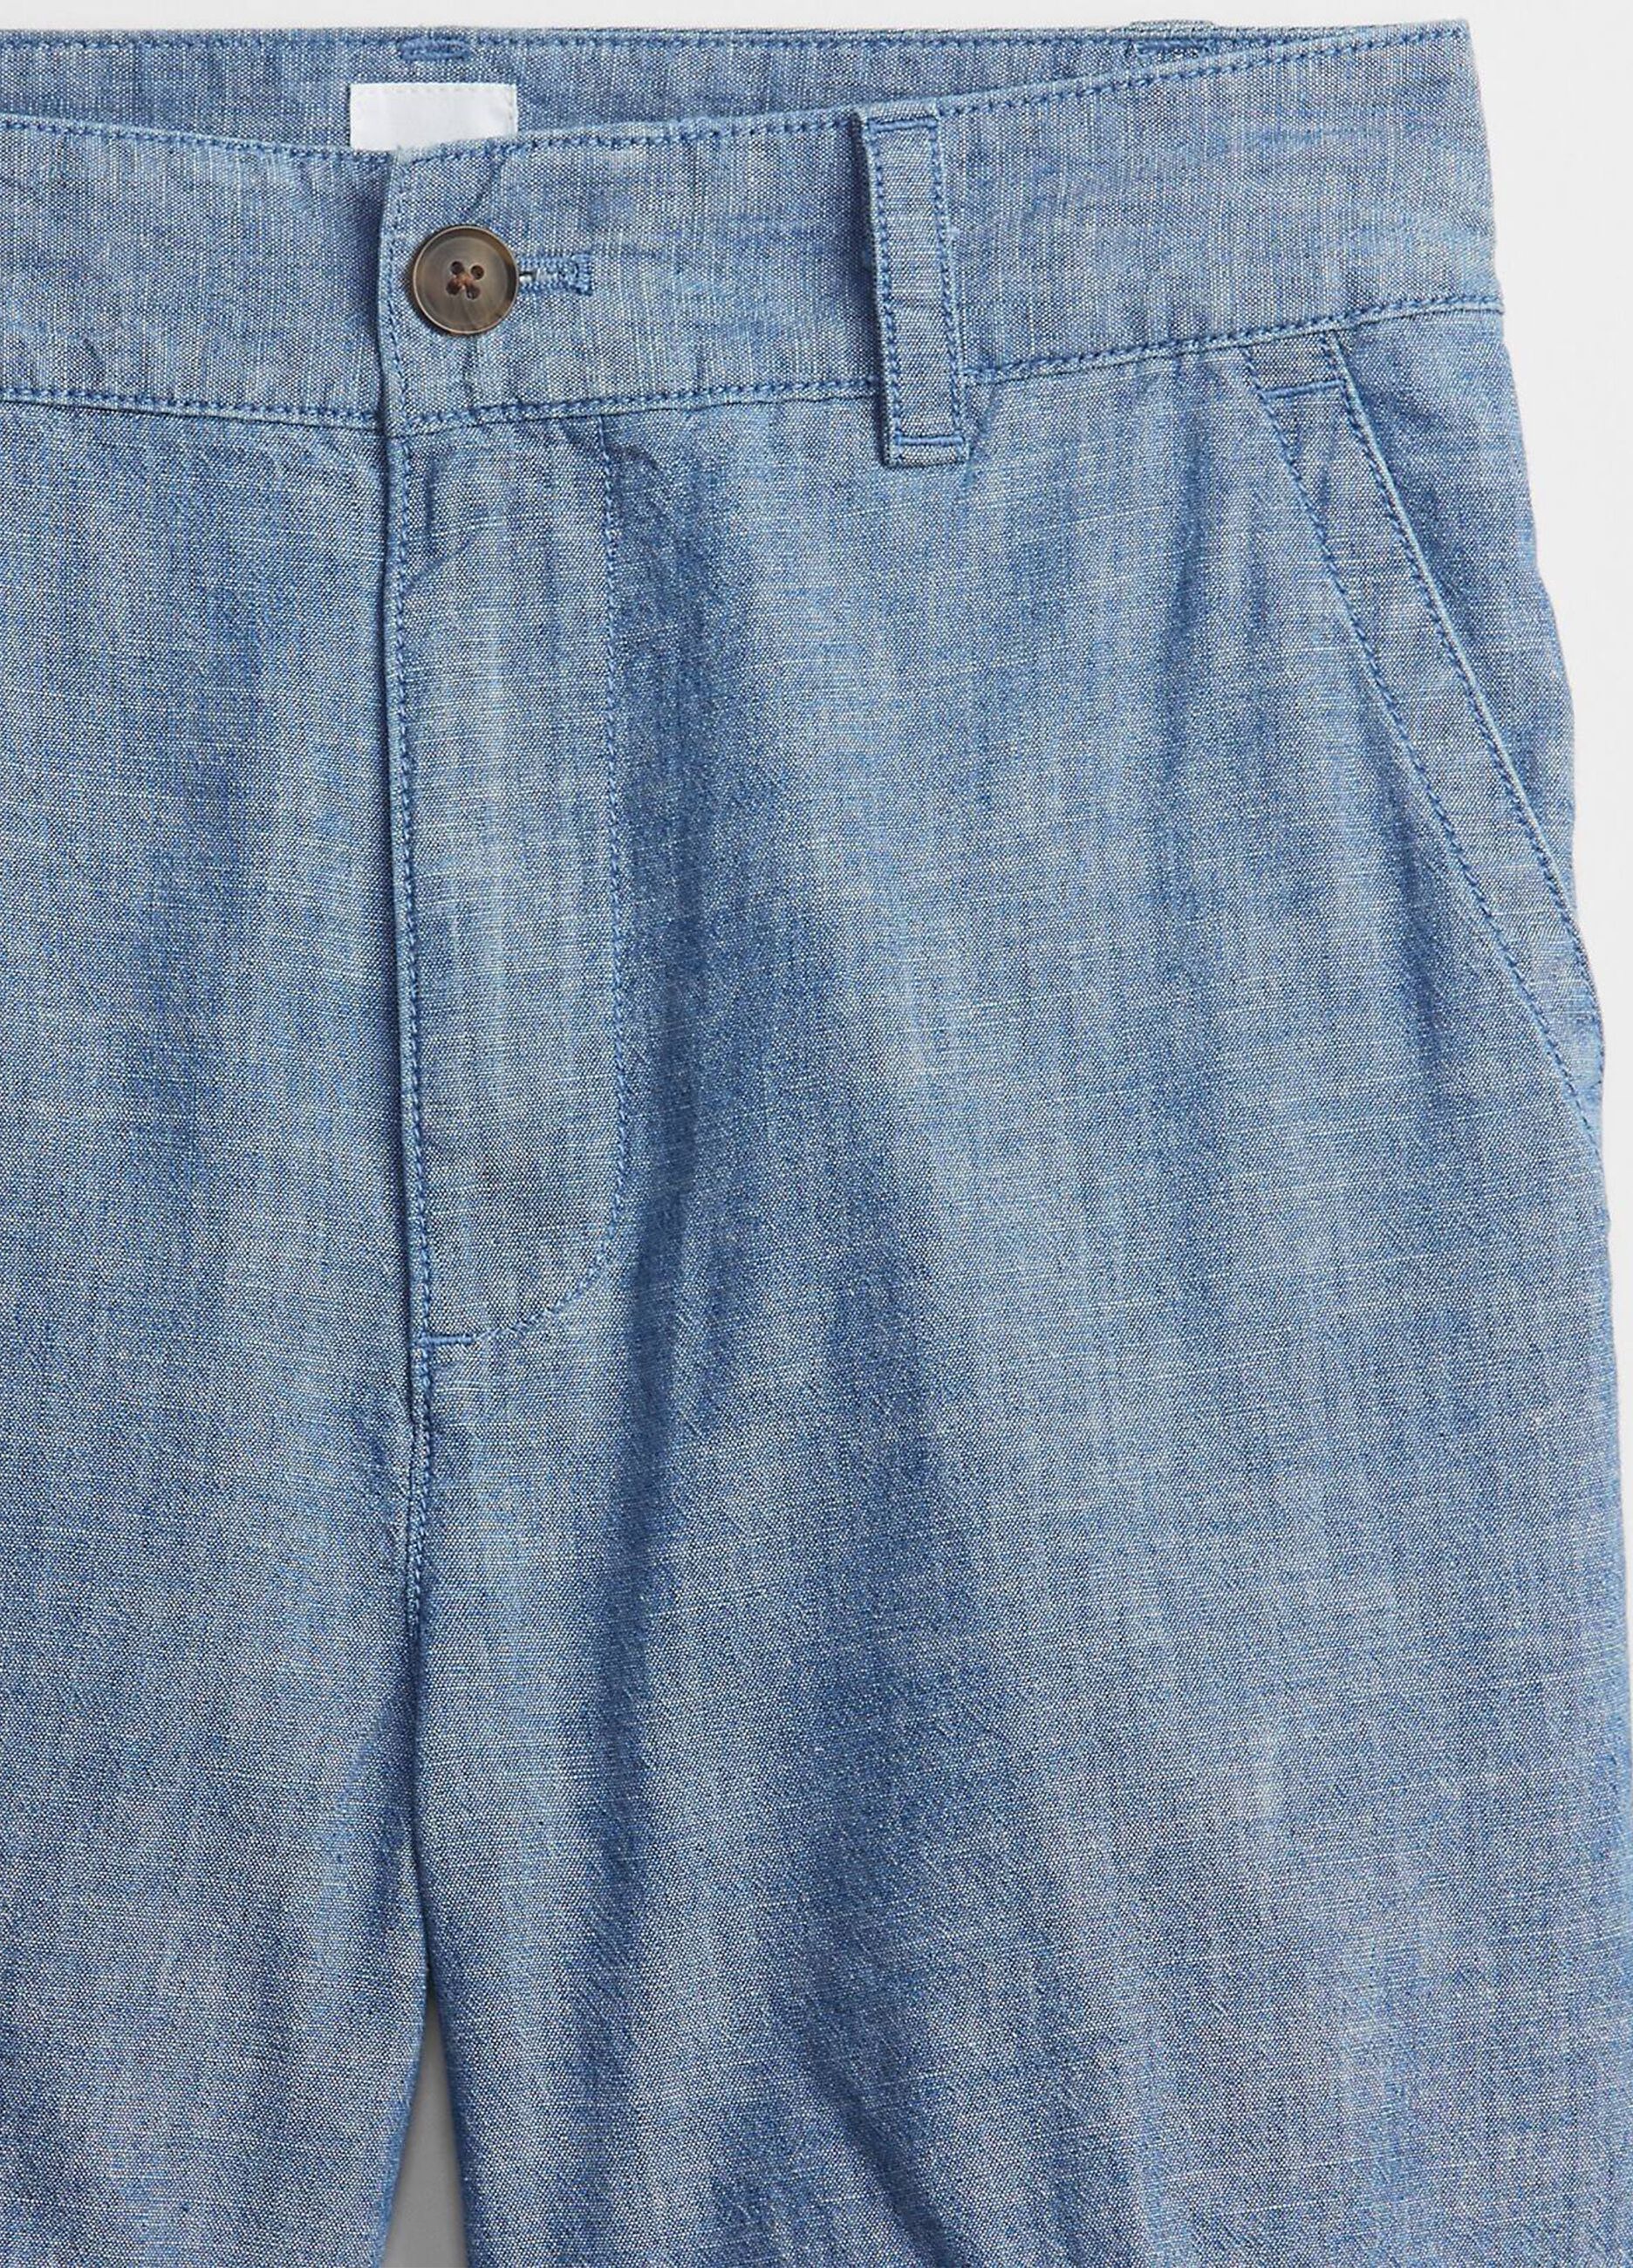 Chino shorts in chambray cotton